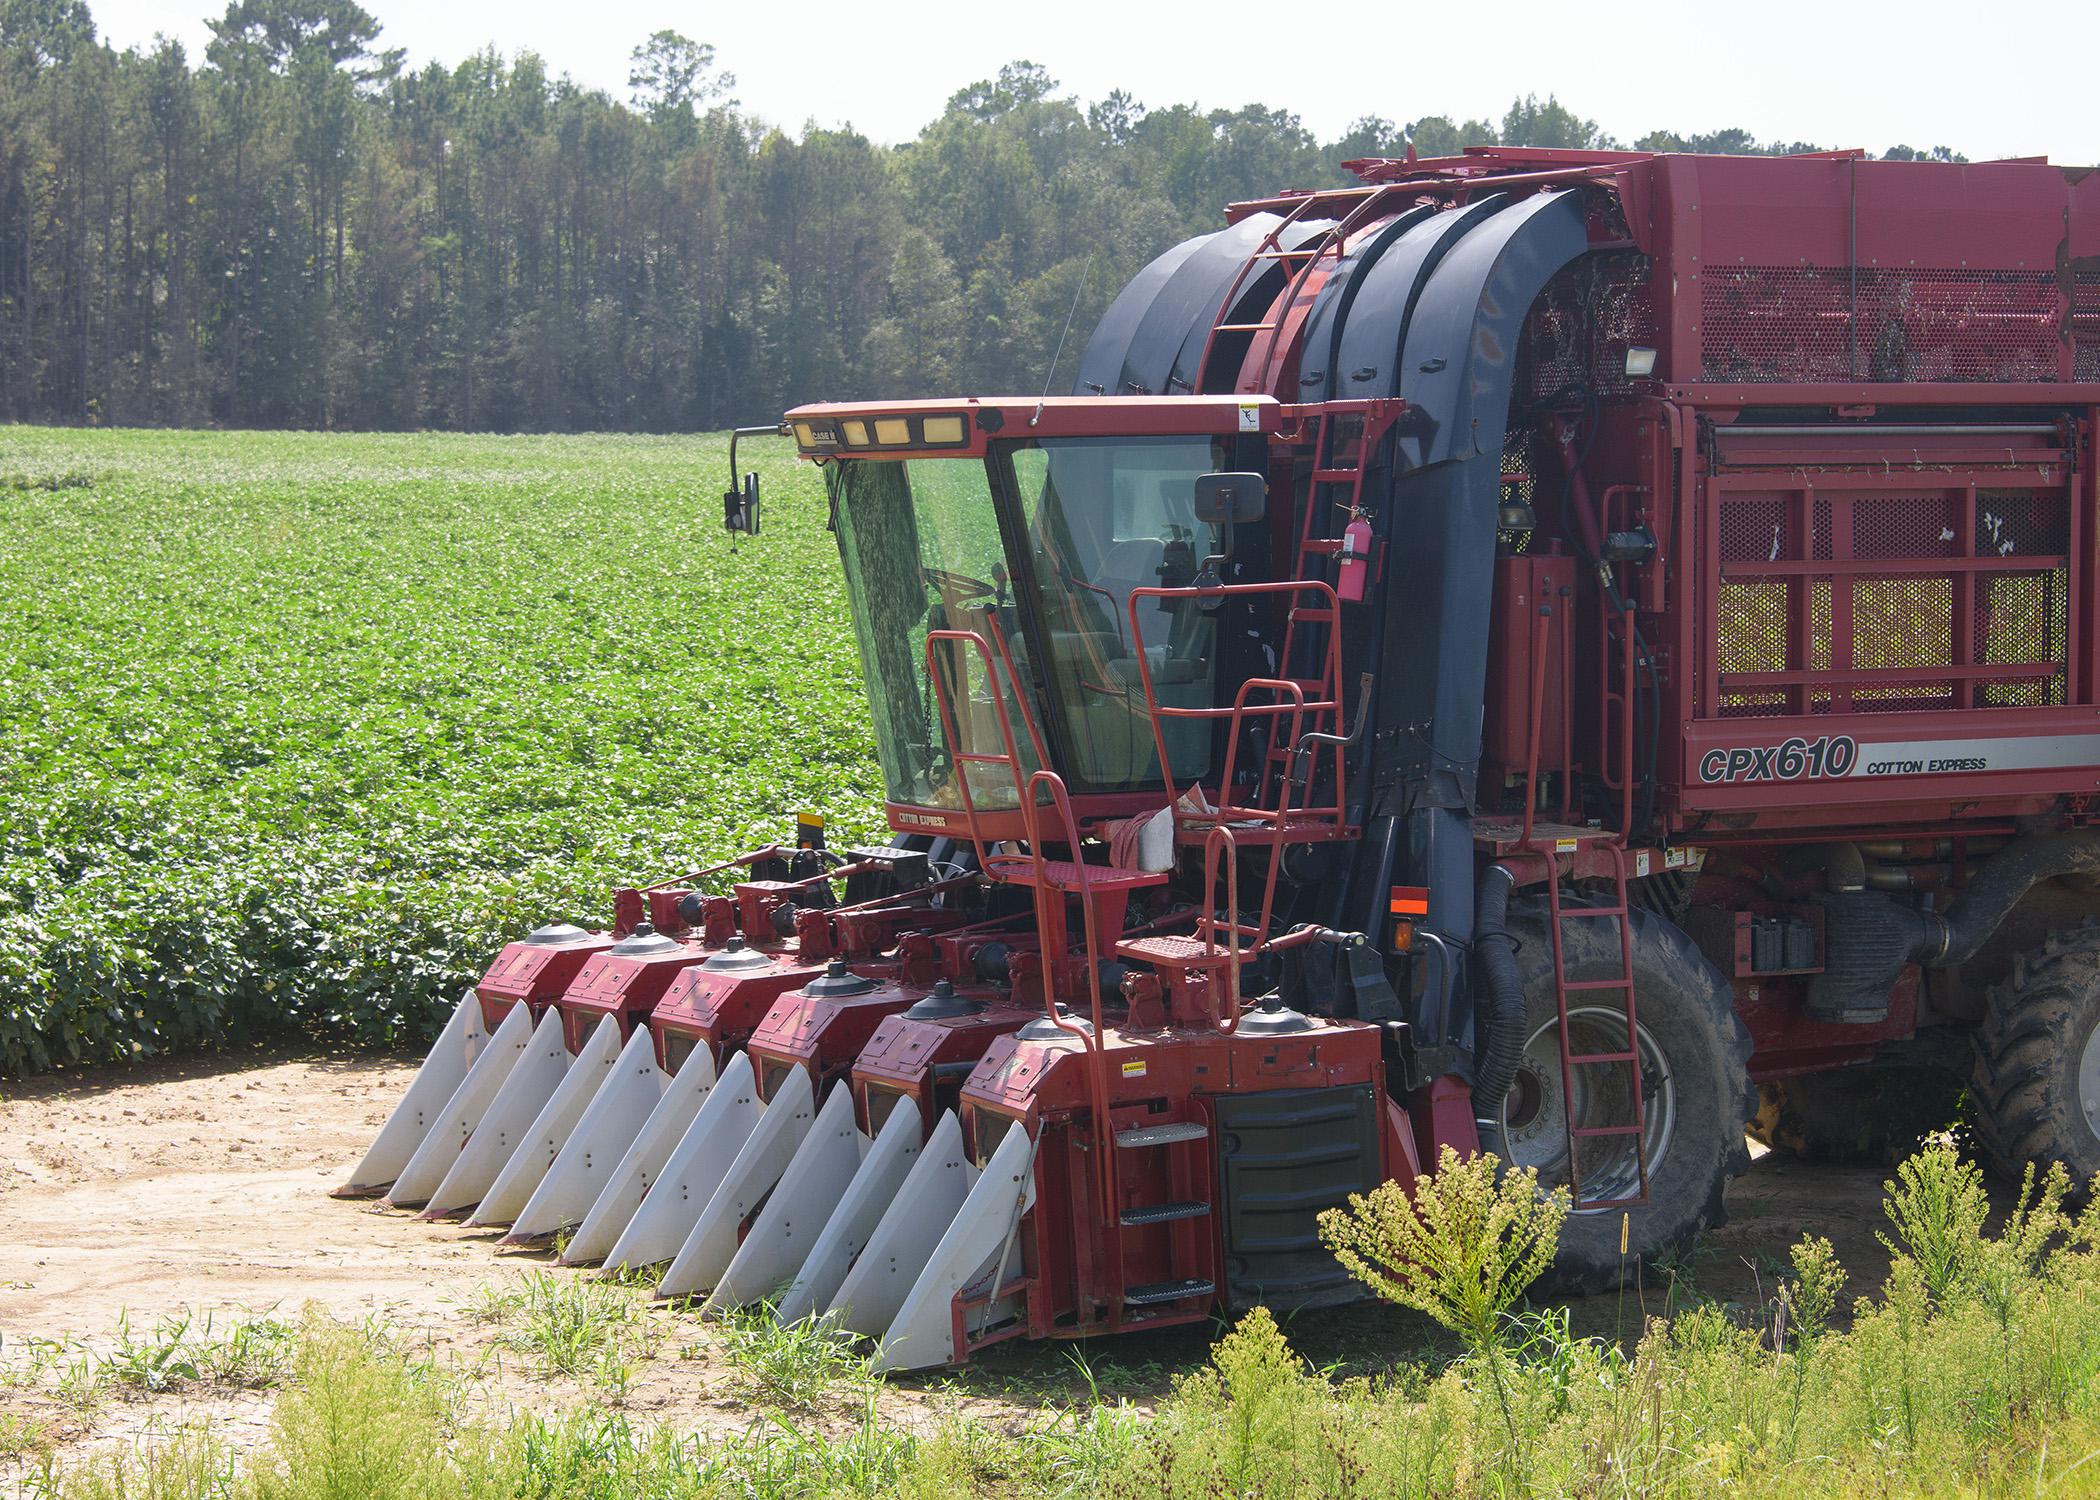 A red cotton picker sits in front of a cotton field.